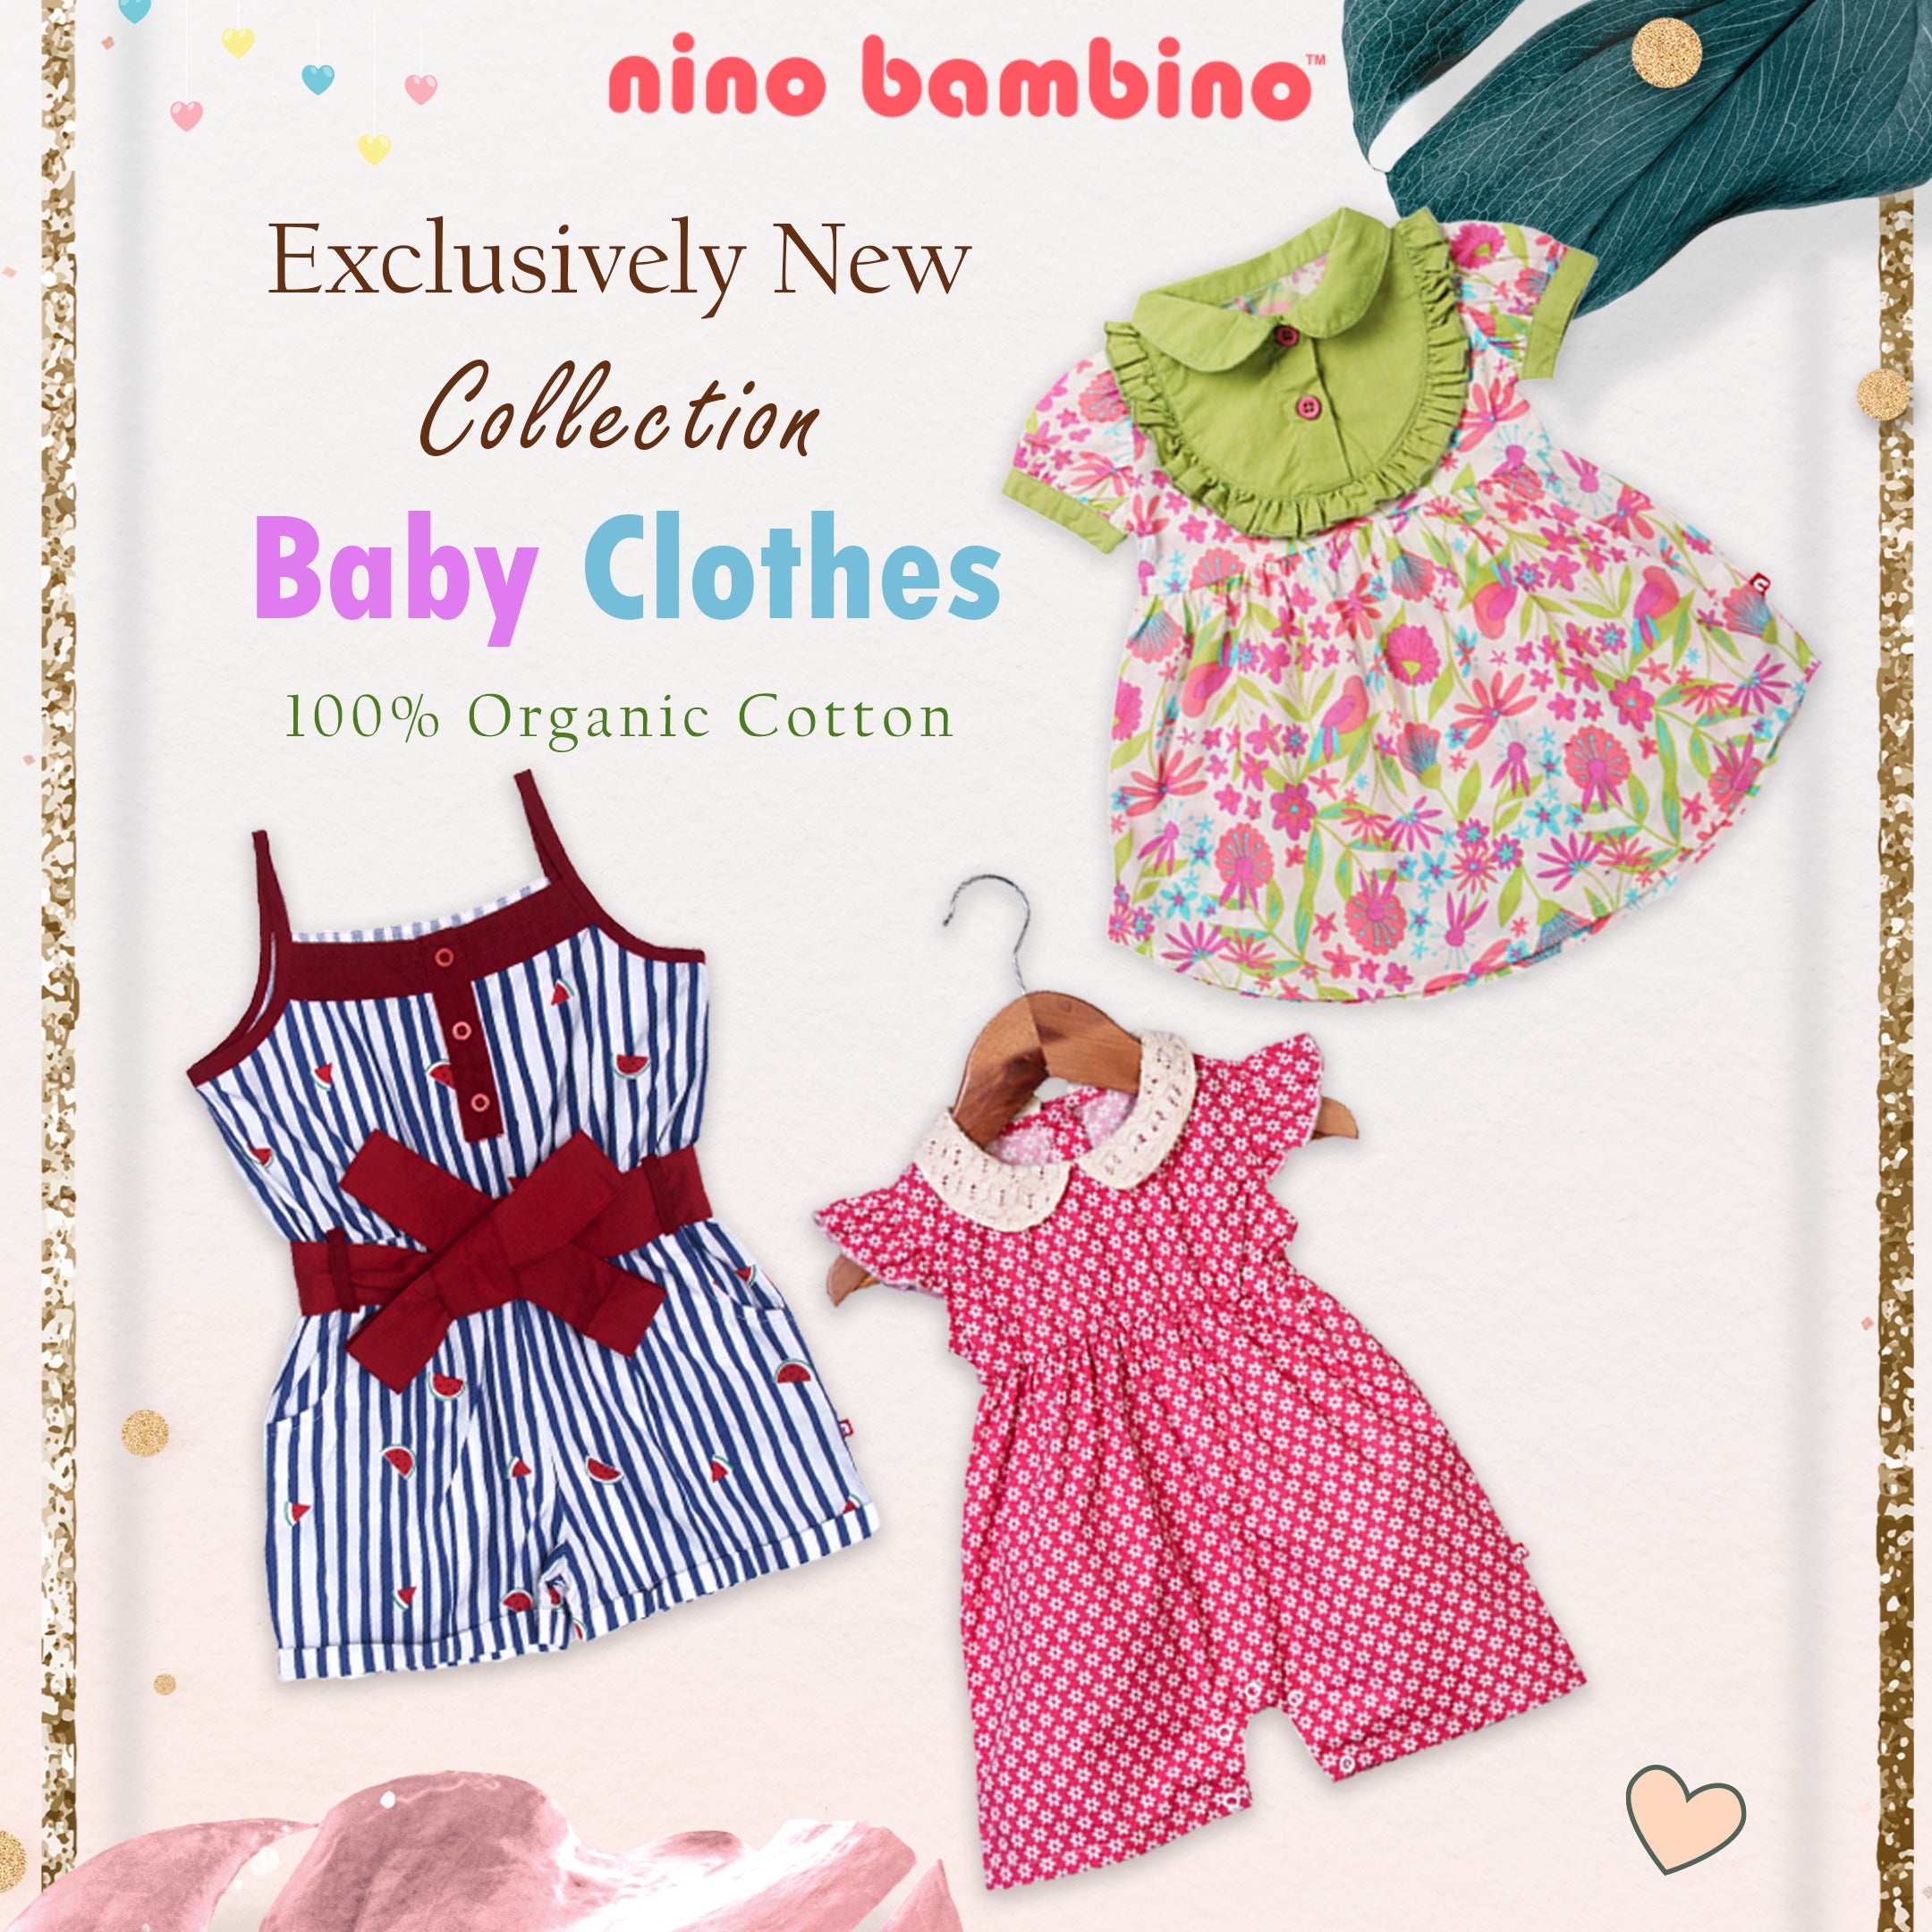 Baby Clothes - Intelligent Thoughts Even as Buying Baby Clothes